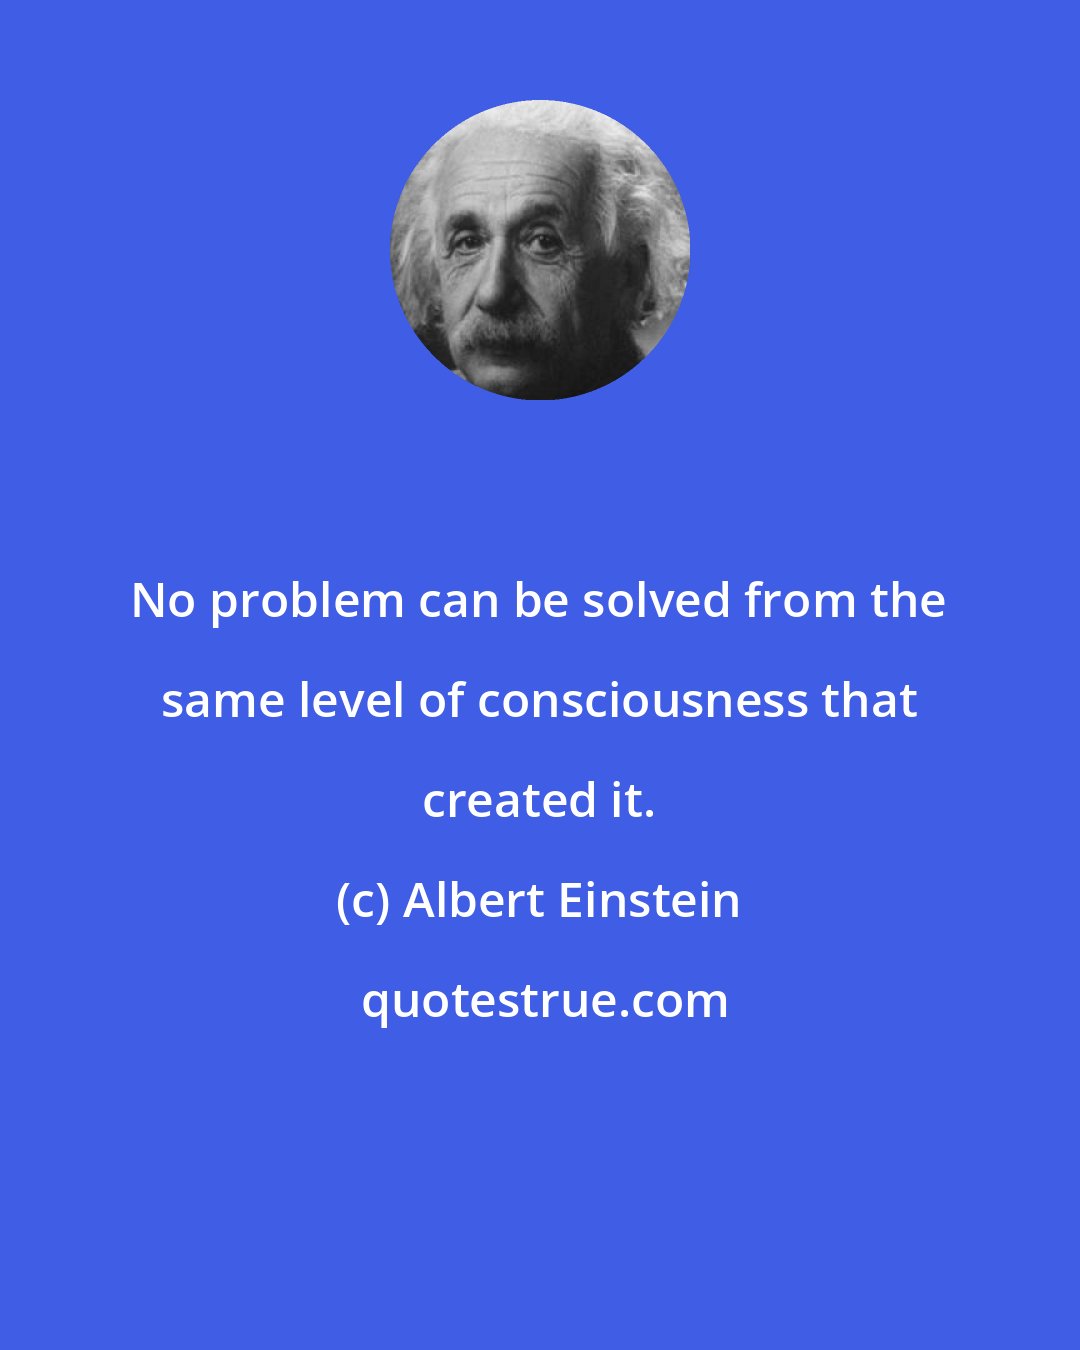 Albert Einstein: No problem can be solved from the same level of consciousness that created it.